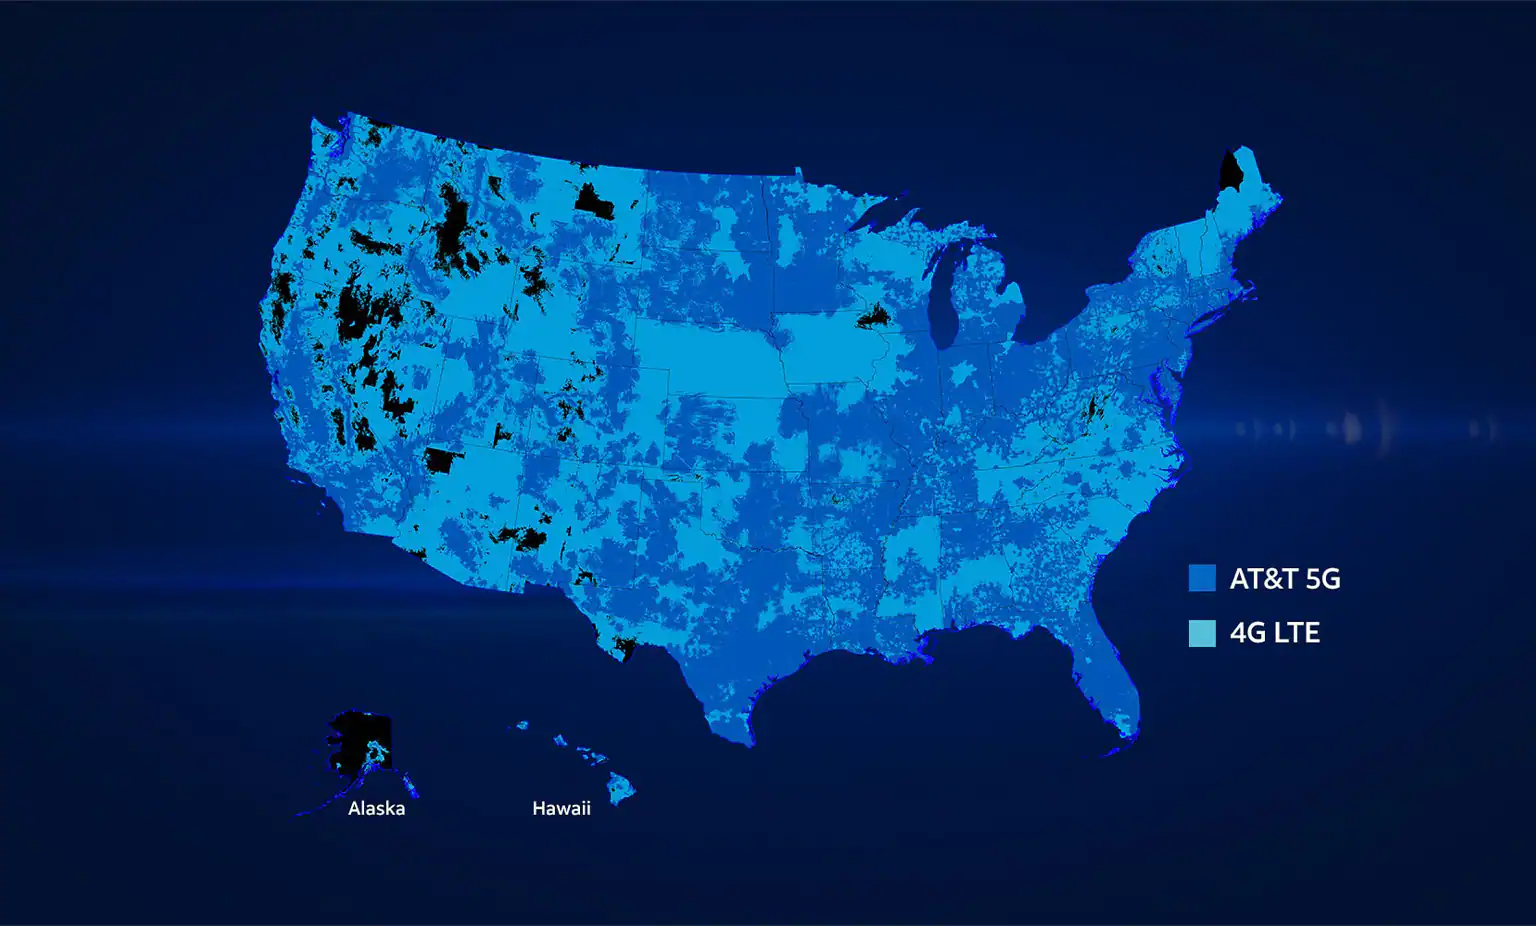 A coverage map of the United States showing AT&T 5G in light blue and 4G LTE in dark blue, with Alaska and Hawaii insets.